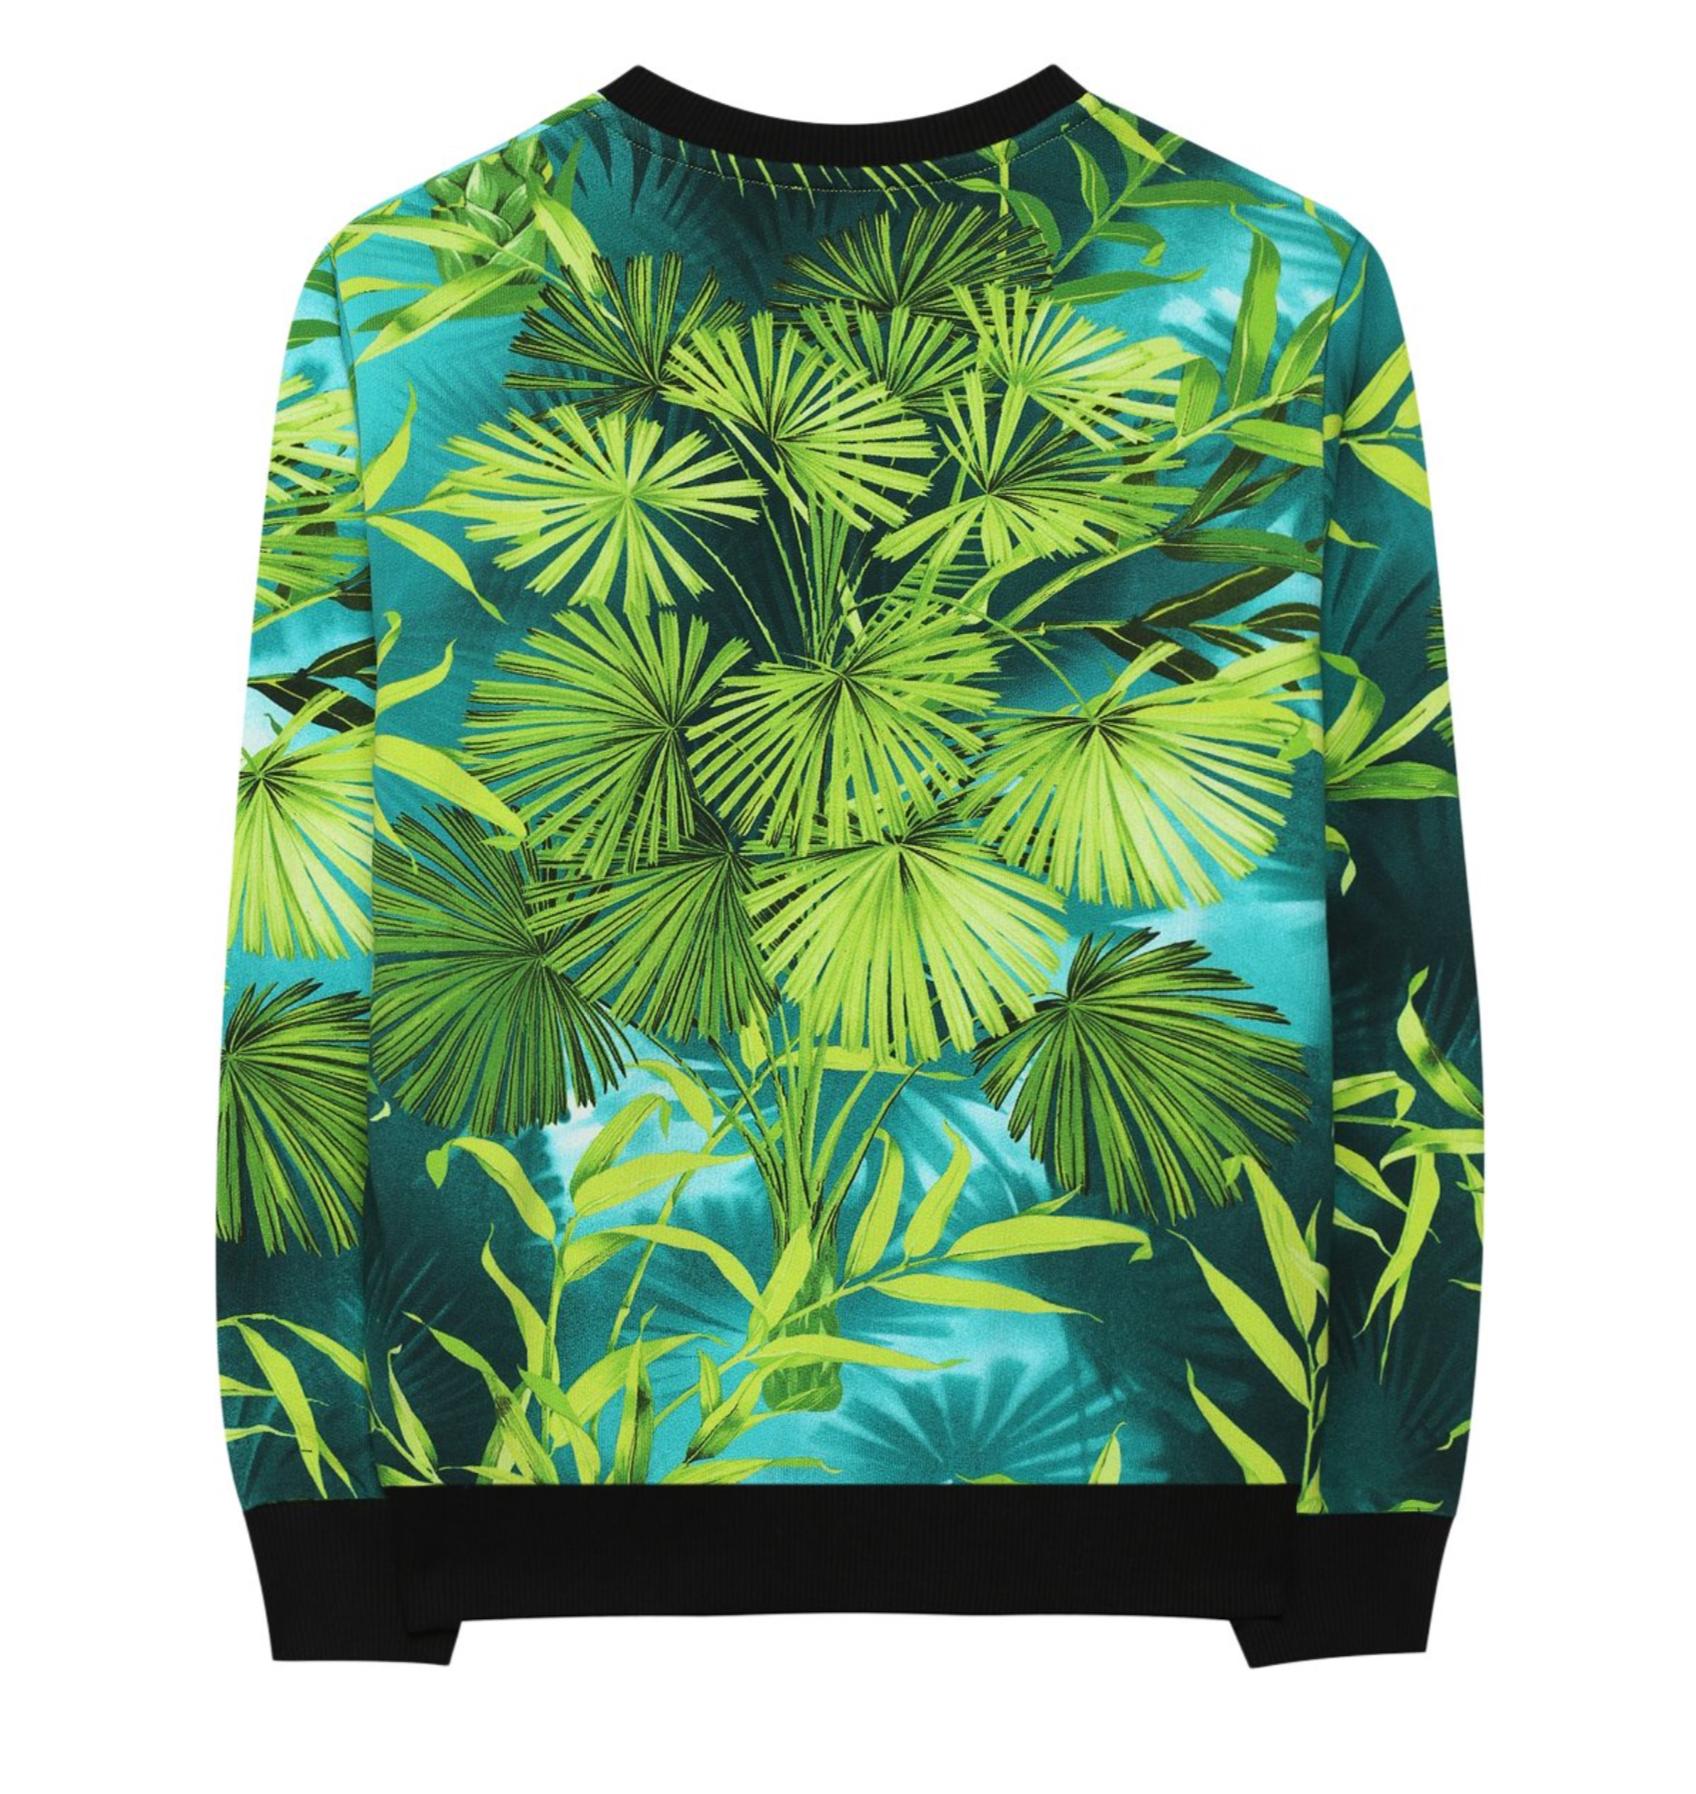 Versace KIDS Tropical Green Verde Jungle Print w/ Medusa Foil Sweatshirt

With Versace's signature Medusa head, this kids sweatshirt is topped in a jungle pattern and classic logo. Featuring a crewneck, long sleeves, pullover design, medusa foiled